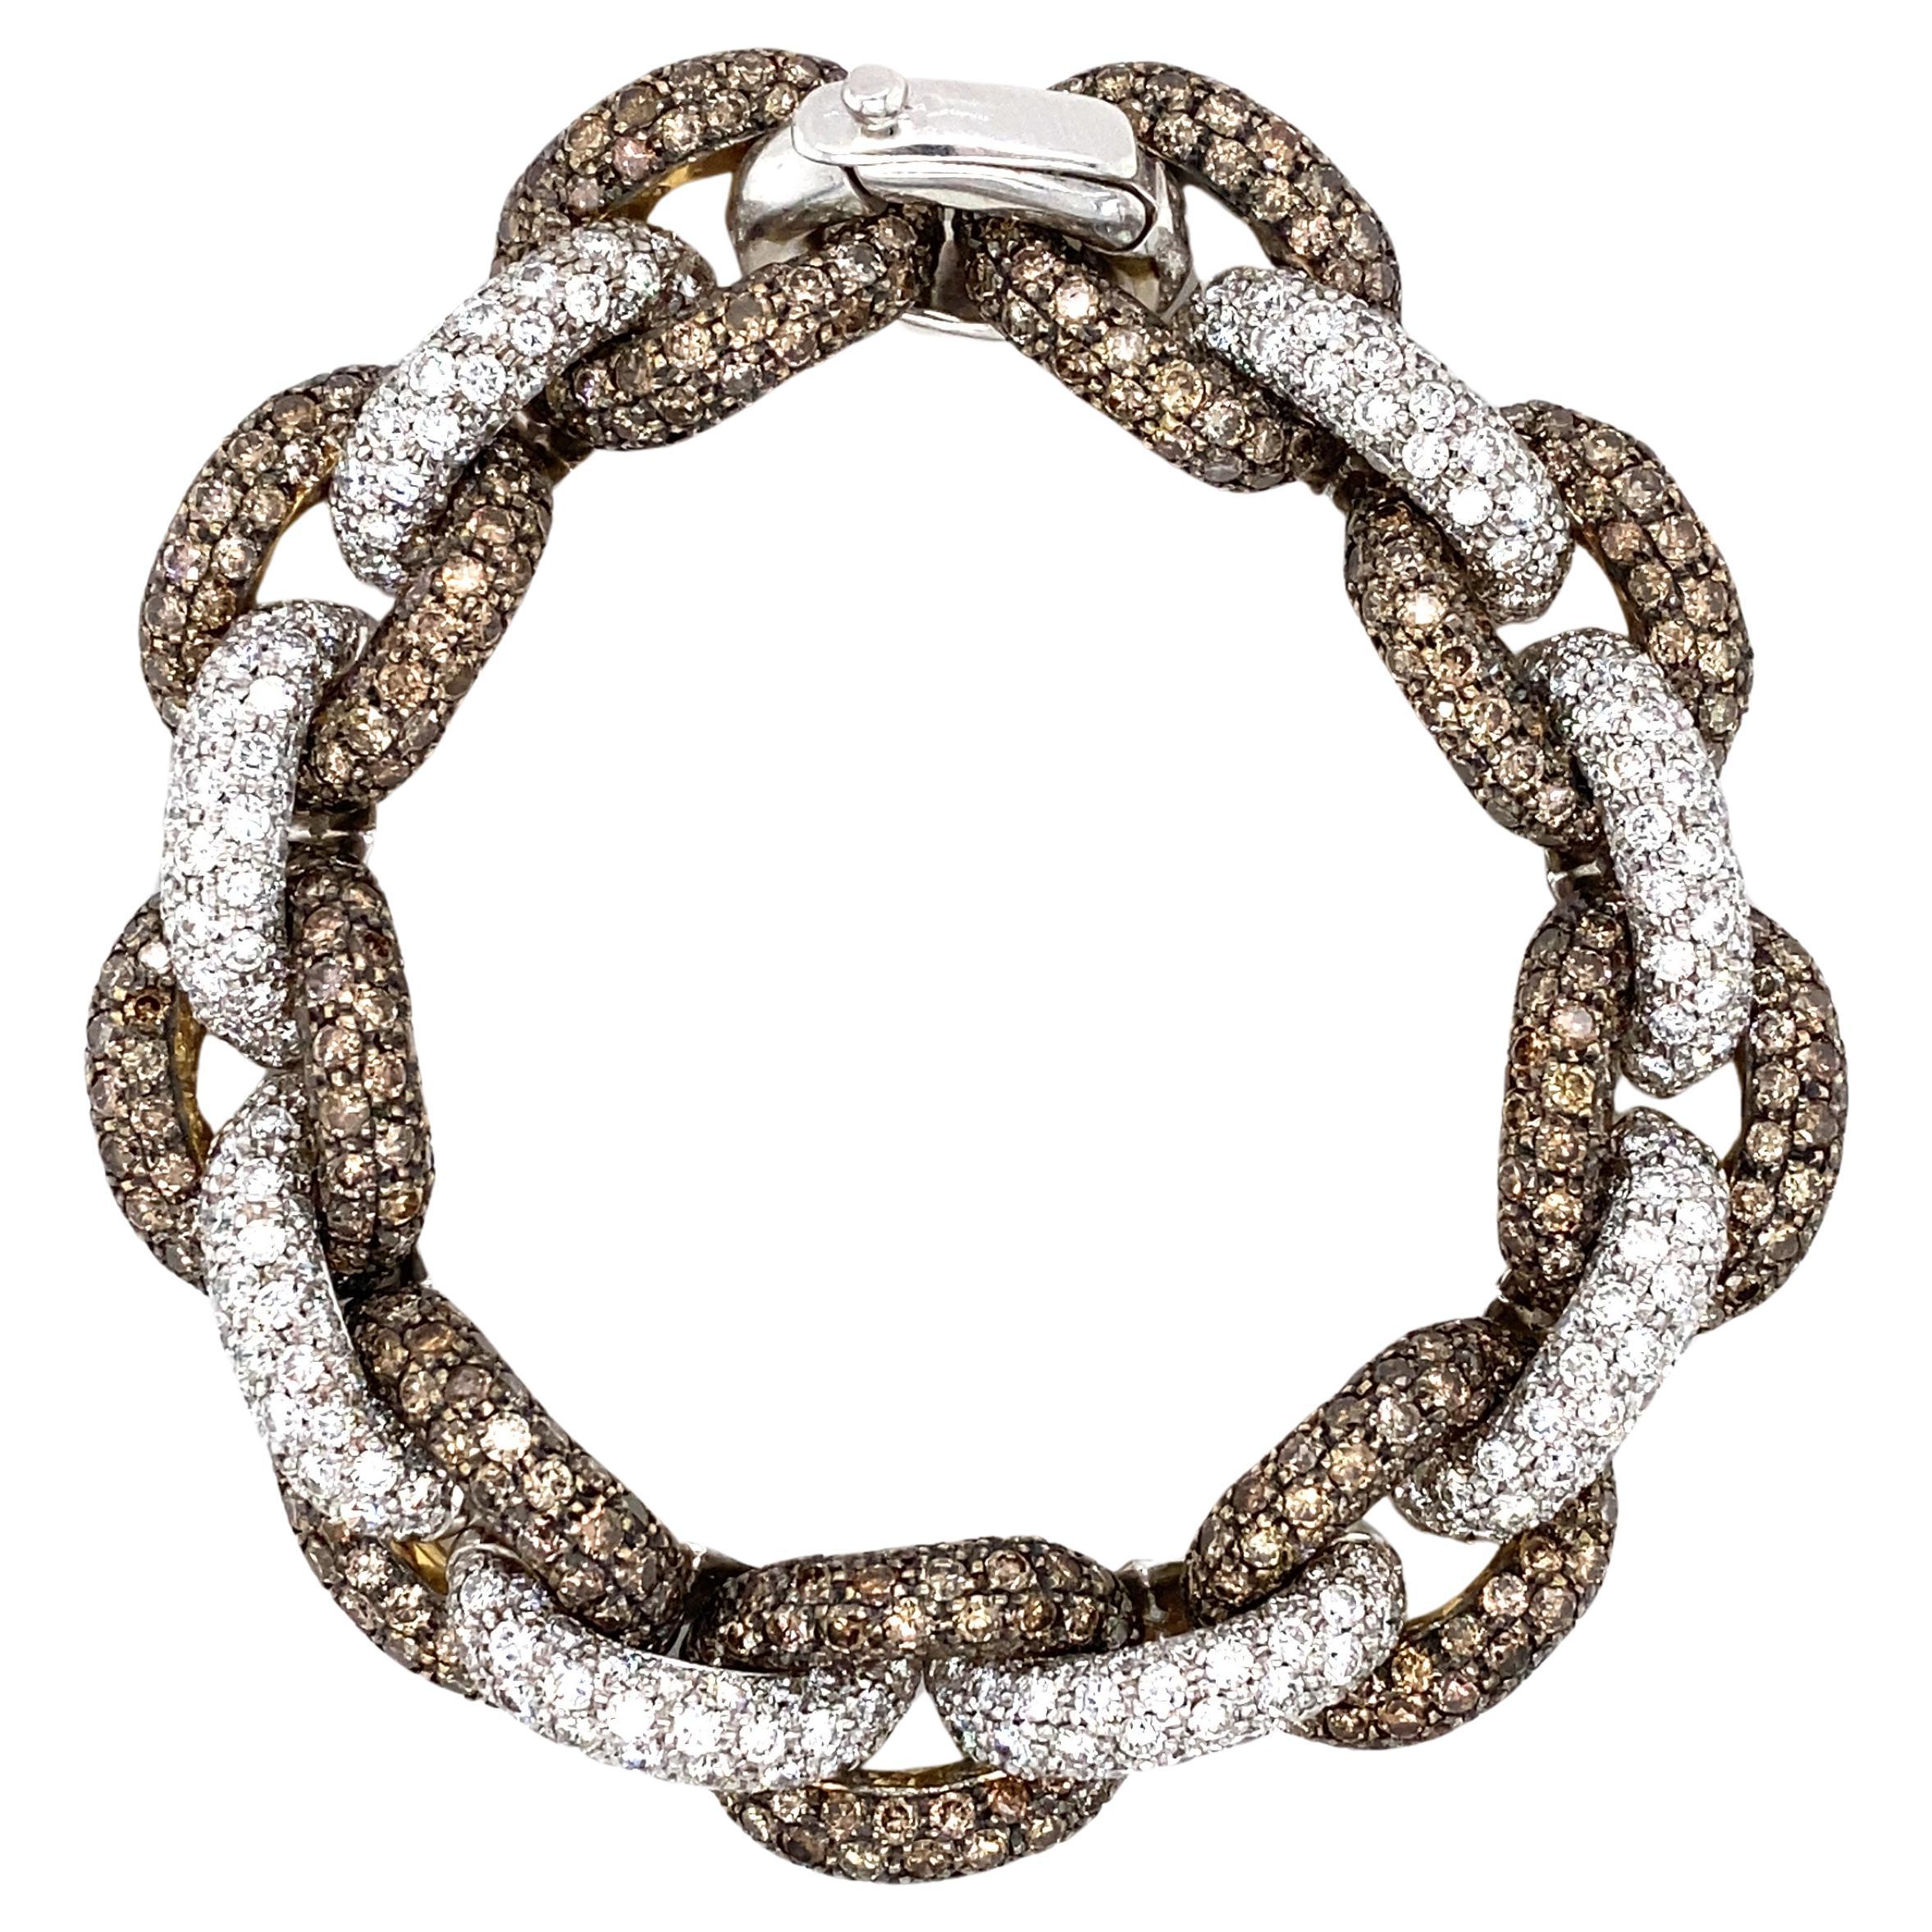 10.0 CTW White and Fancy Brown Diamond Chain Bracelet in 14 Karat Gold For Sale